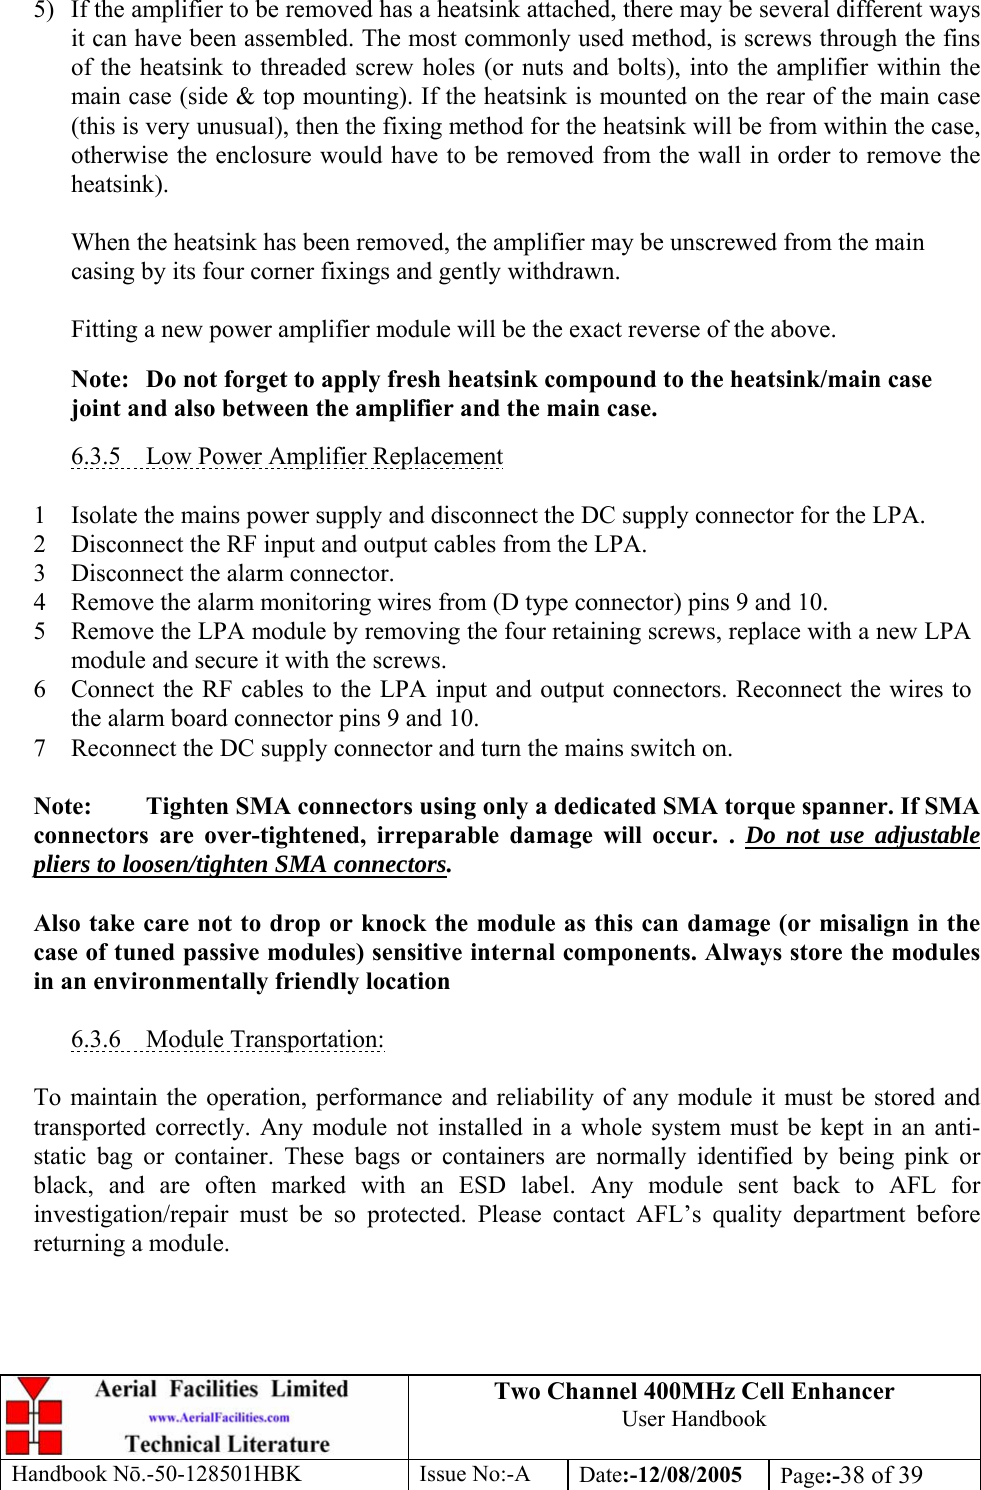 Two Channel 400MHz Cell Enhancer User Handbook Handbook N.-50-128501HBK Issue No:-A Date:-12/08/2005  Page:-38 of 39   5)  If the amplifier to be removed has a heatsink attached, there may be several different ways it can have been assembled. The most commonly used method, is screws through the fins of the heatsink to threaded screw holes (or nuts and bolts), into the amplifier within the main case (side &amp; top mounting). If the heatsink is mounted on the rear of the main case (this is very unusual), then the fixing method for the heatsink will be from within the case, otherwise the enclosure would have to be removed from the wall in order to remove the heatsink).  When the heatsink has been removed, the amplifier may be unscrewed from the main casing by its four corner fixings and gently withdrawn.  Fitting a new power amplifier module will be the exact reverse of the above.  Note:  Do not forget to apply fresh heatsink compound to the heatsink/main case joint and also between the amplifier and the main case.  6.3.5  Low Power Amplifier Replacement  1 Isolate the mains power supply and disconnect the DC supply connector for the LPA. 2 Disconnect the RF input and output cables from the LPA. 3 Disconnect the alarm connector. 4 Remove the alarm monitoring wires from (D type connector) pins 9 and 10. 5 Remove the LPA module by removing the four retaining screws, replace with a new LPA module and secure it with the screws. 6 Connect the RF cables to the LPA input and output connectors. Reconnect the wires to the alarm board connector pins 9 and 10. 7 Reconnect the DC supply connector and turn the mains switch on.  Note:  Tighten SMA connectors using only a dedicated SMA torque spanner. If SMA connectors are over-tightened, irreparable damage will occur. . Do not use adjustable pliers to loosen/tighten SMA connectors.  Also take care not to drop or knock the module as this can damage (or misalign in the case of tuned passive modules) sensitive internal components. Always store the modules in an environmentally friendly location  6.3.6 Module Transportation:  To maintain the operation, performance and reliability of any module it must be stored and transported correctly. Any module not installed in a whole system must be kept in an anti-static bag or container. These bags or containers are normally identified by being pink or black, and are often marked with an ESD label. Any module sent back to AFL for investigation/repair must be so protected. Please contact AFL’s quality department before returning a module. 